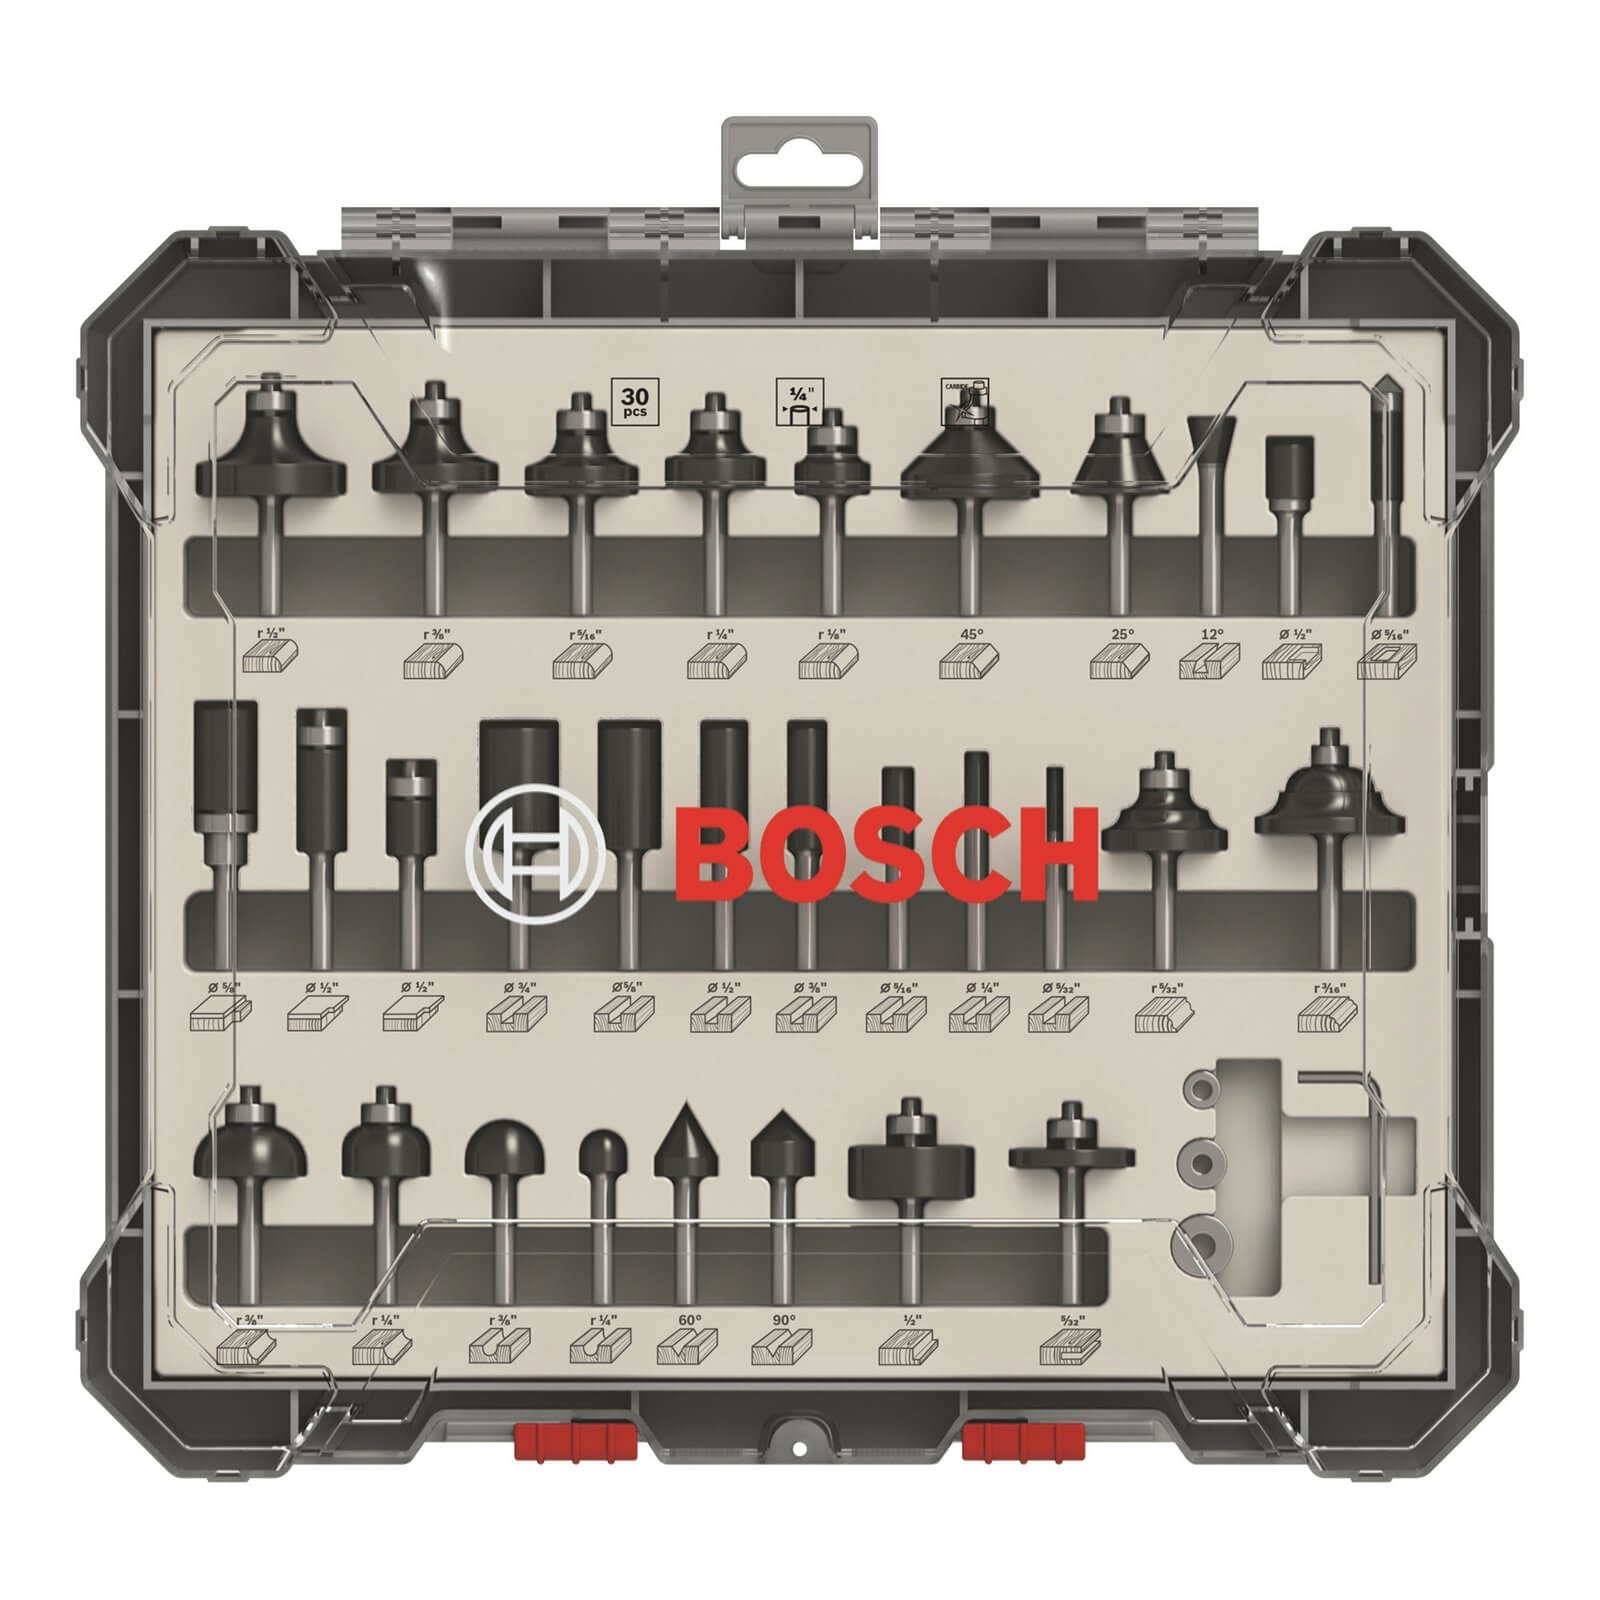 Router Bits - 30 piece - Mixed 1/4 Shank